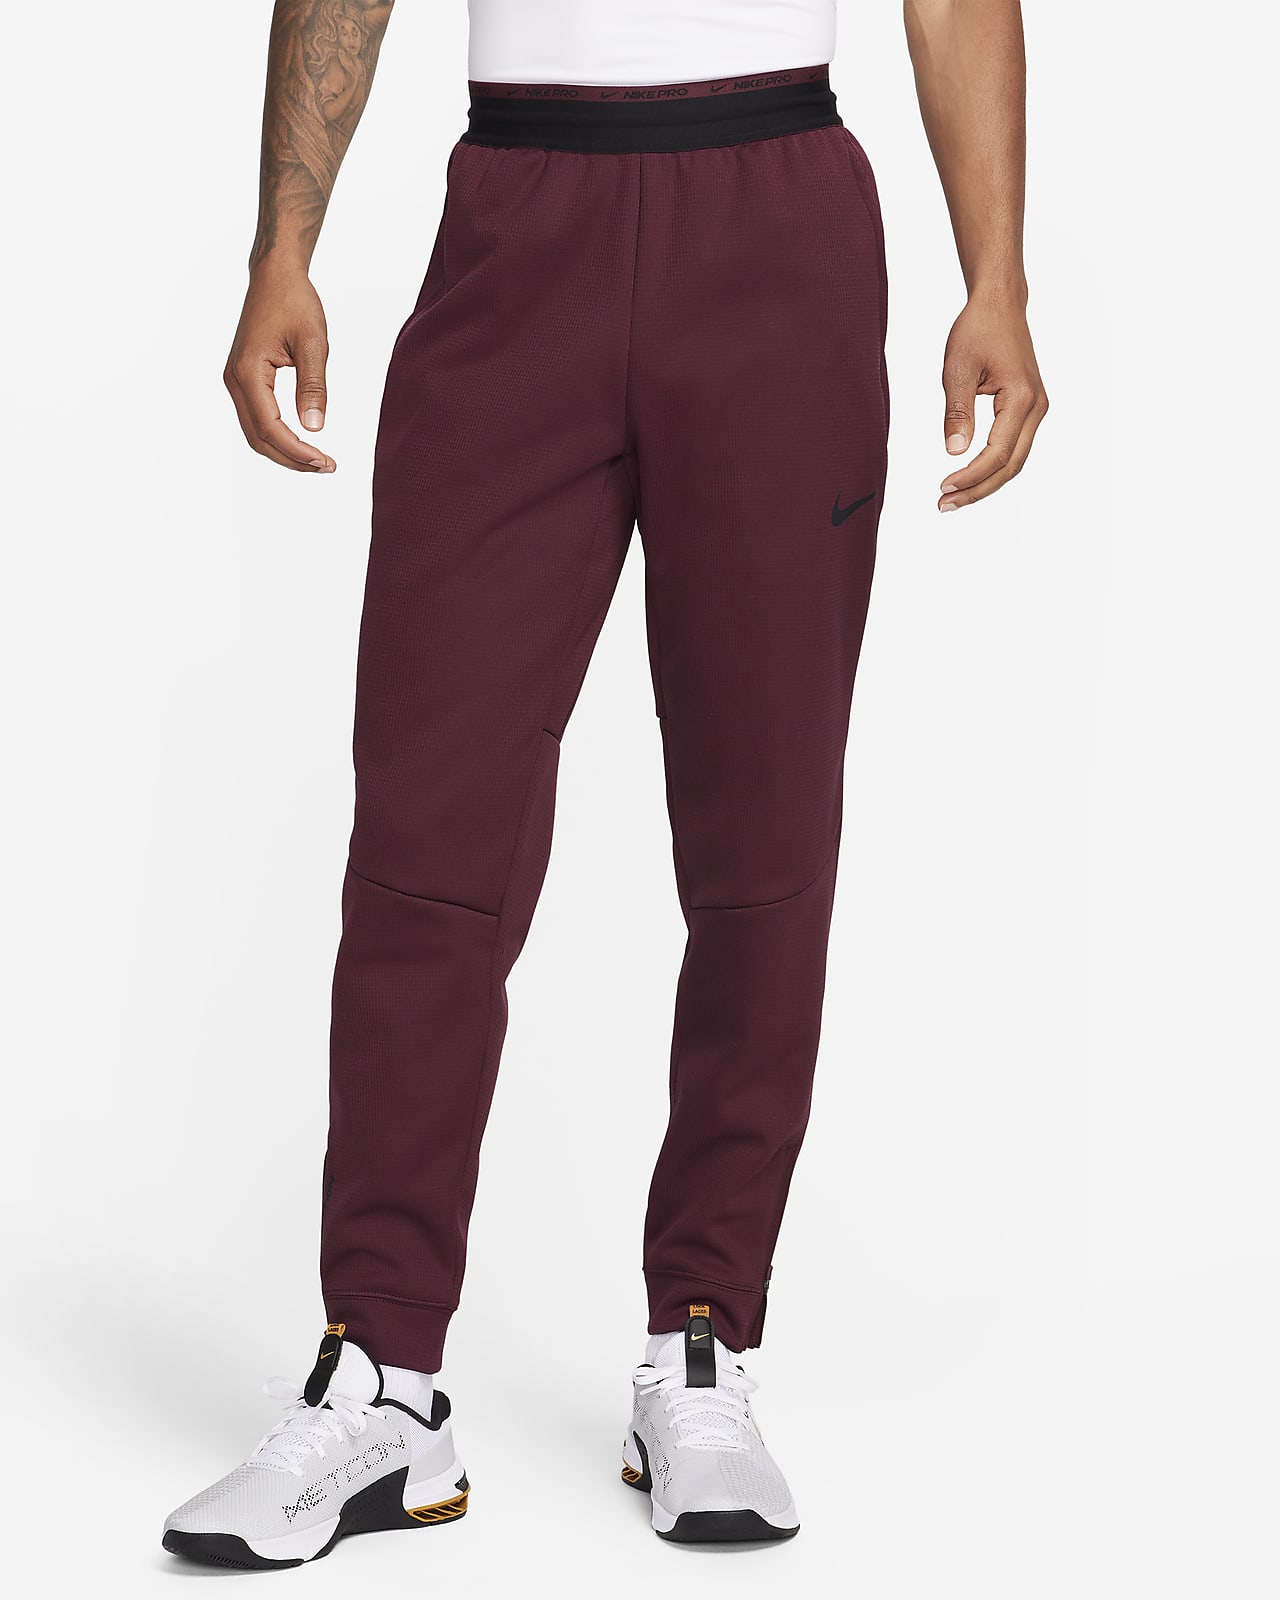 Nike Womens Tech Fleece Therma-Fit Pants, Color Options (Large